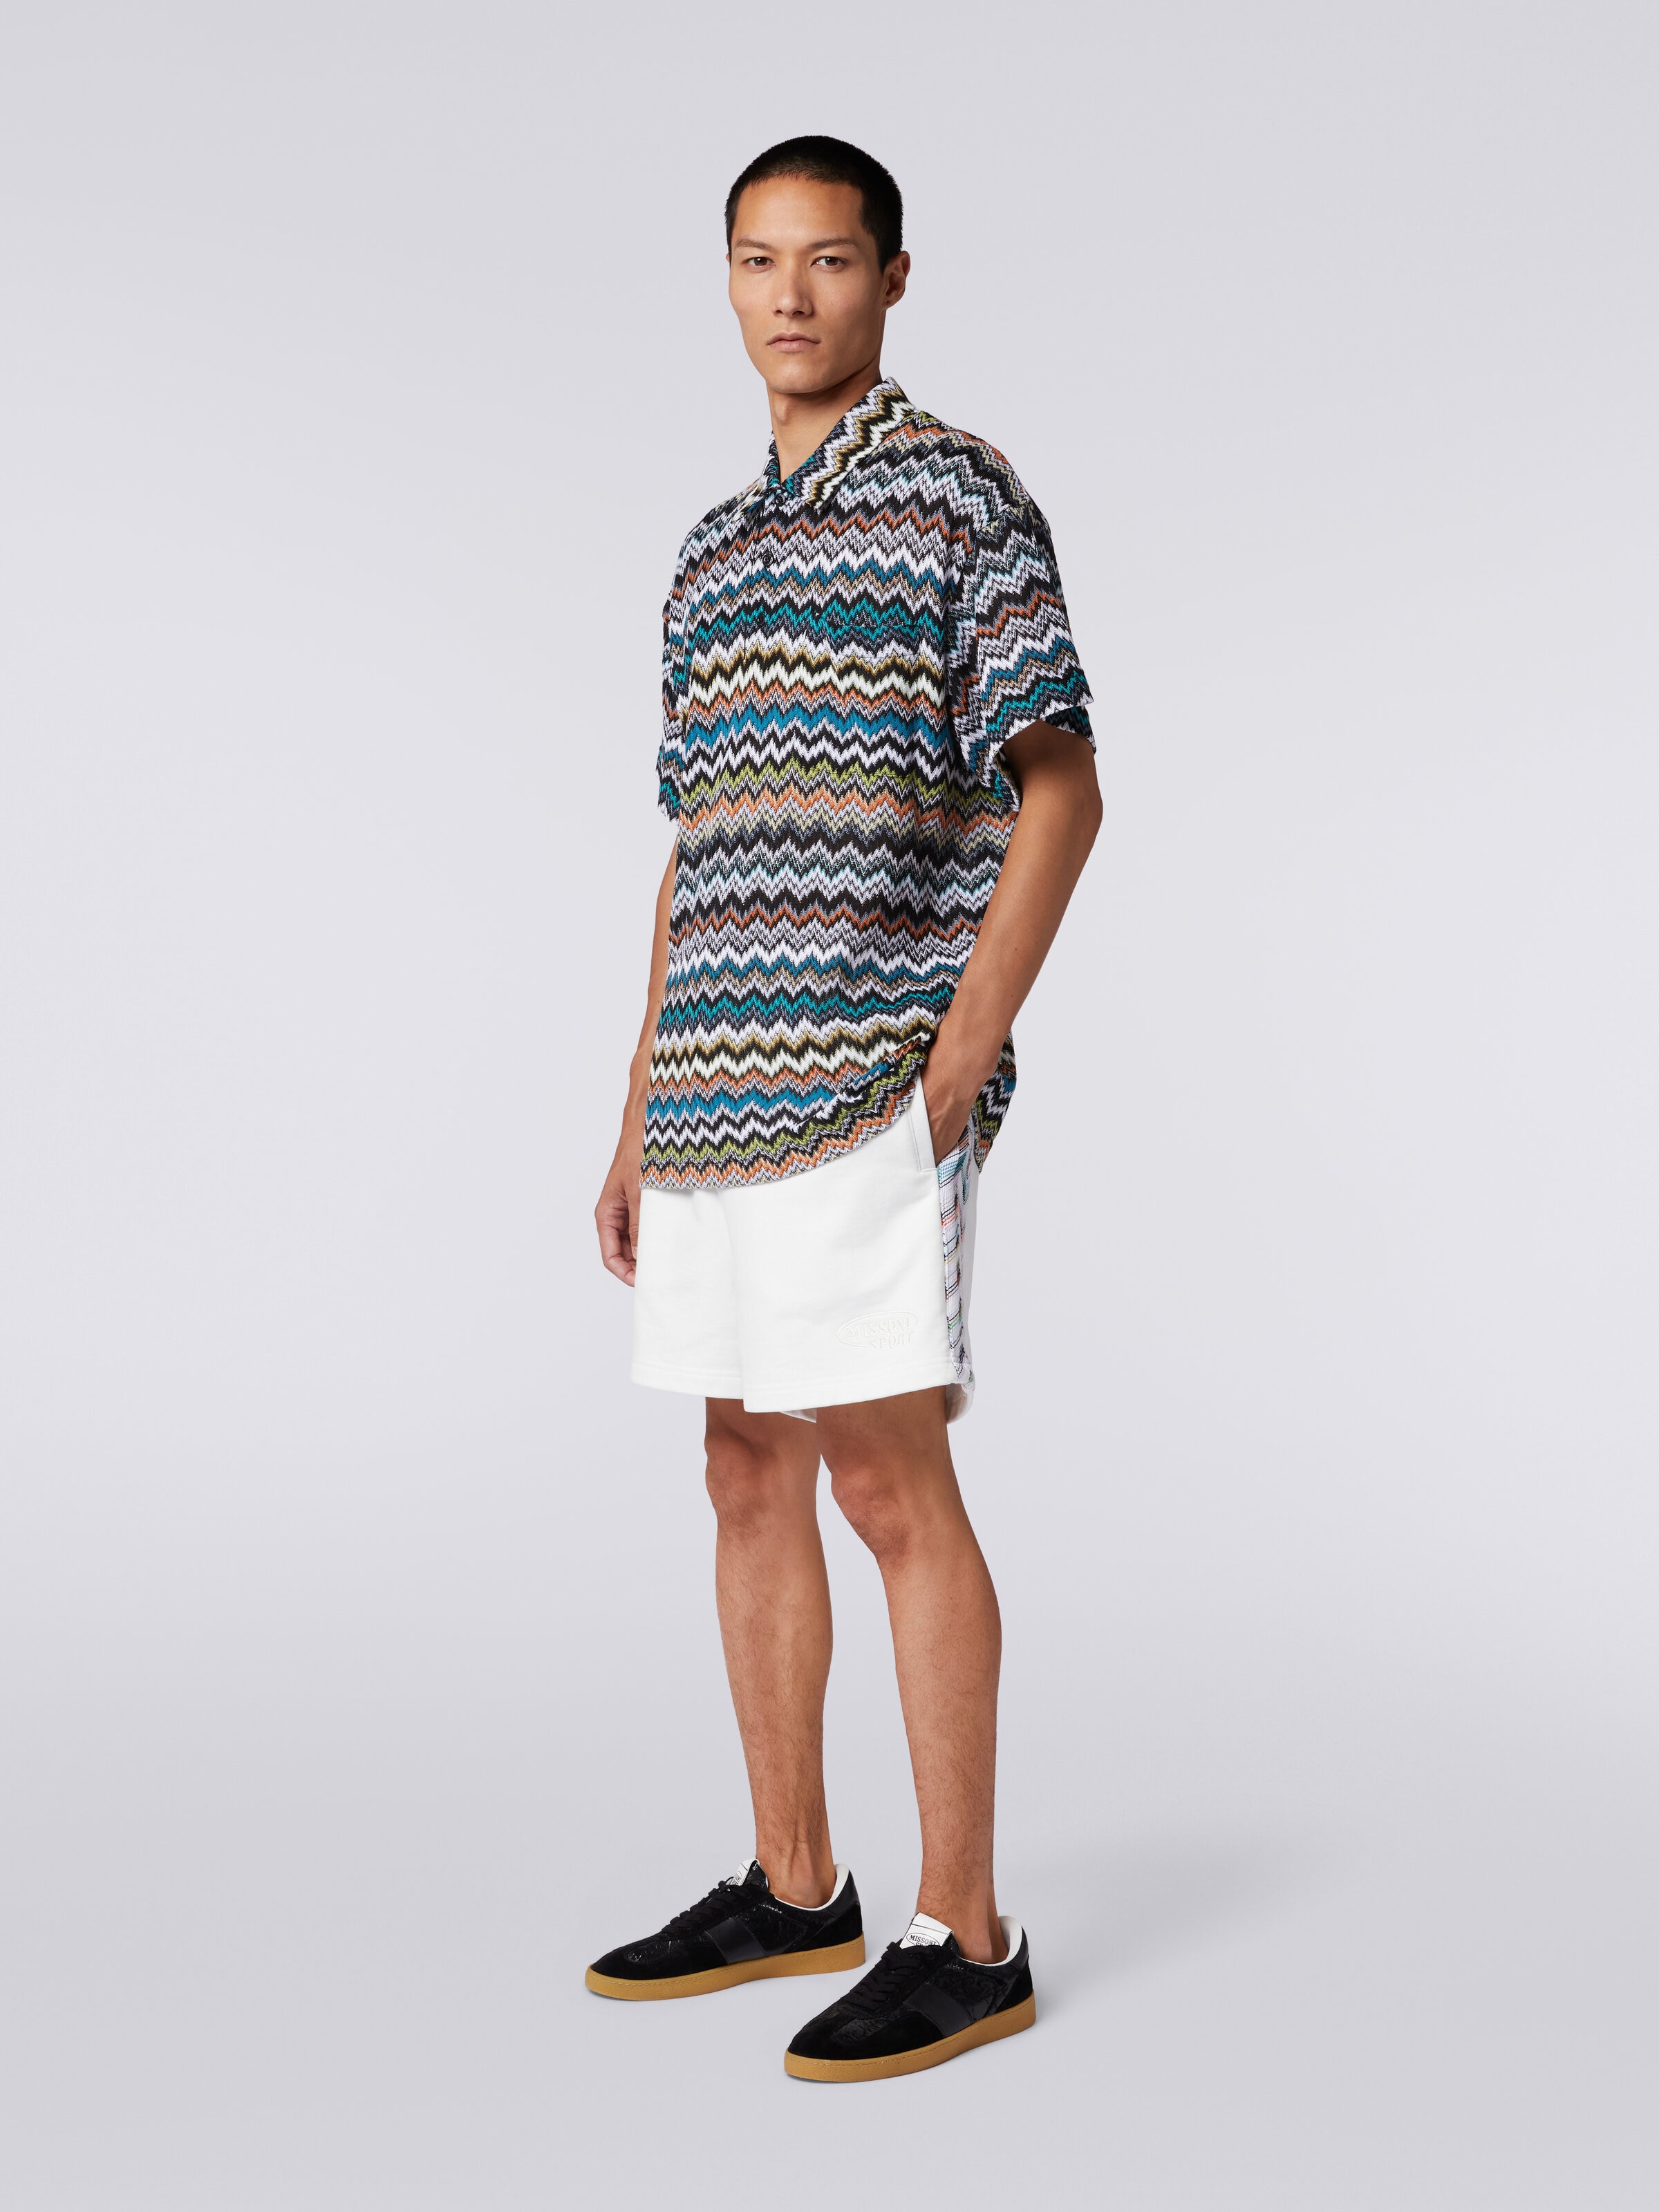 Polo shirt in zigzag cotton and viscose knit, Multicoloured  - 2